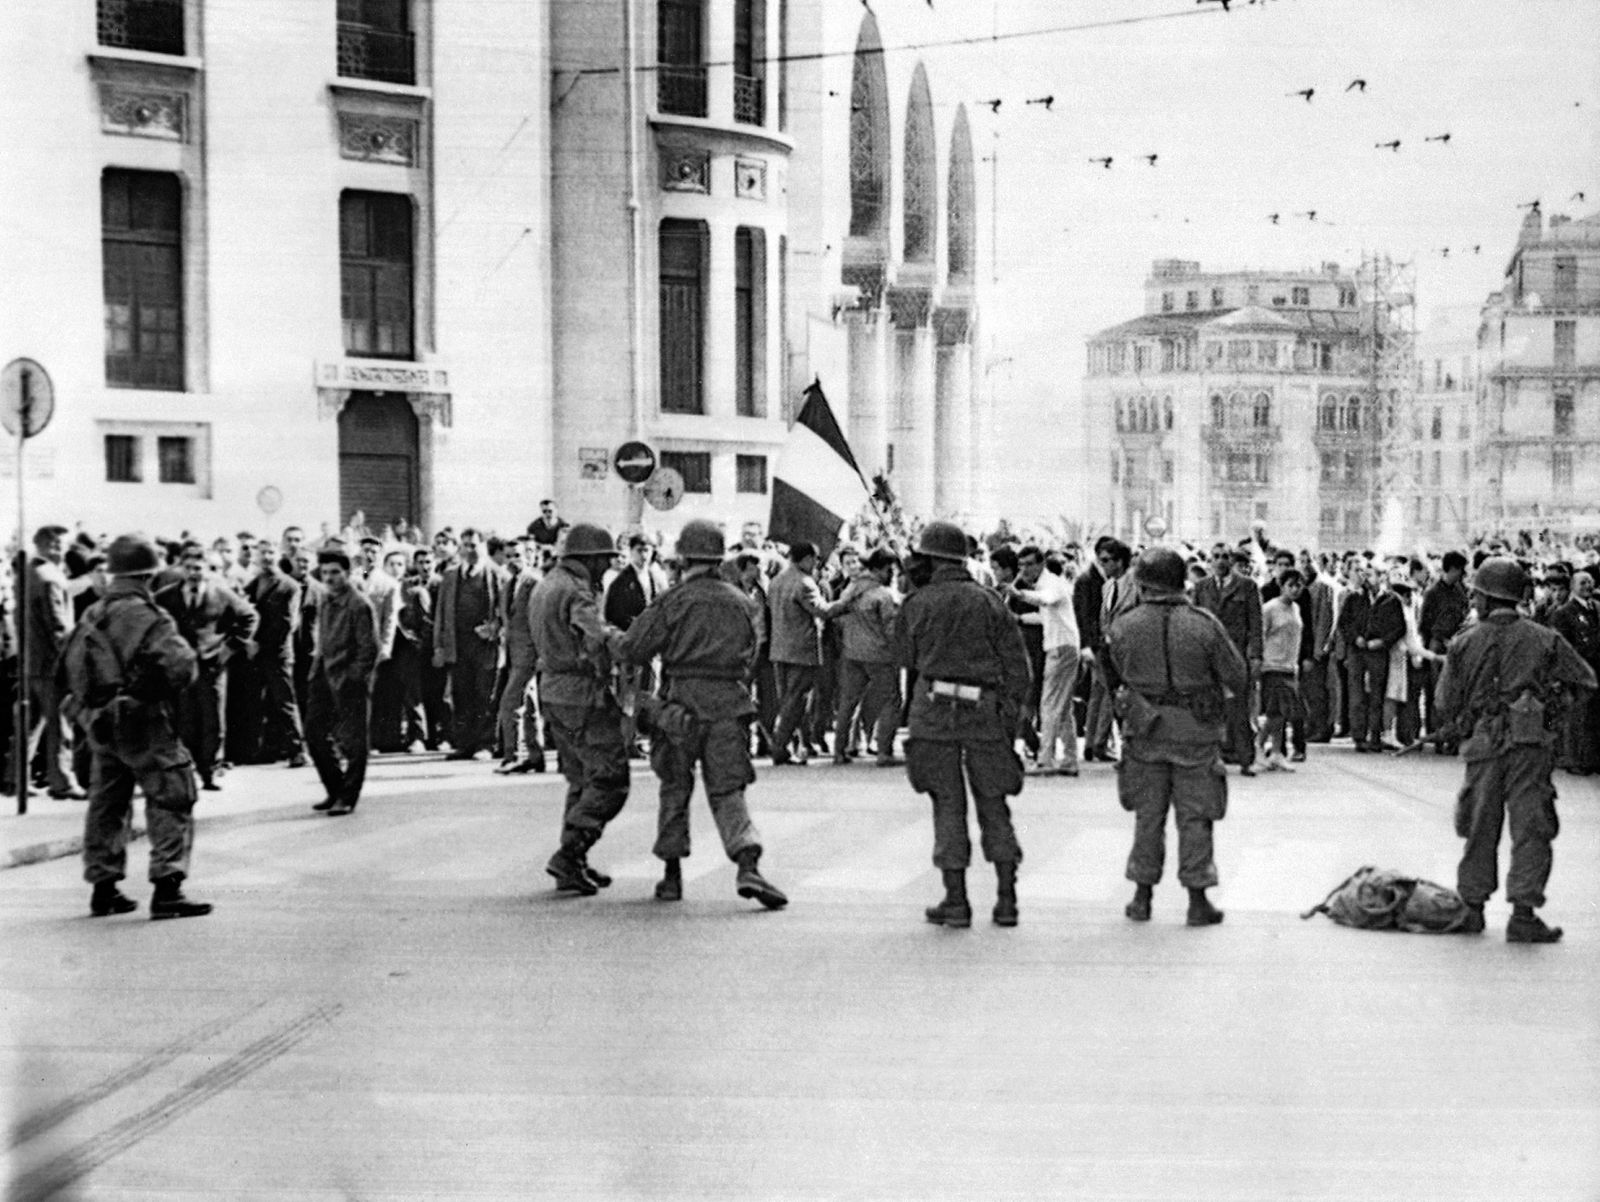 (FILES) In this file photo taken on March 26, 1962, French army soldiers and tirailleurs from the 4th Algerian Tirailleurs Regiment (RTA), face European protesters opposed to the independence of Algeria, in front of the Post of the rue d'Isly in Algiers, at a demonstration called by the Secret Armed Organization (OAS), during which the forces of the order opened fire on the demonstrators, killing more than dozens. - The Evian Accords were signed on March 18, 1962, between France and the Provisional Government of the Algerian Republic (GPRA), the government-in-exile of the Algerian National Liberation Front (FLN), ending the Algerian War of 1954-1962 and pathing the way for Algeria's Independence from France. (Photo by AFP) - AFP